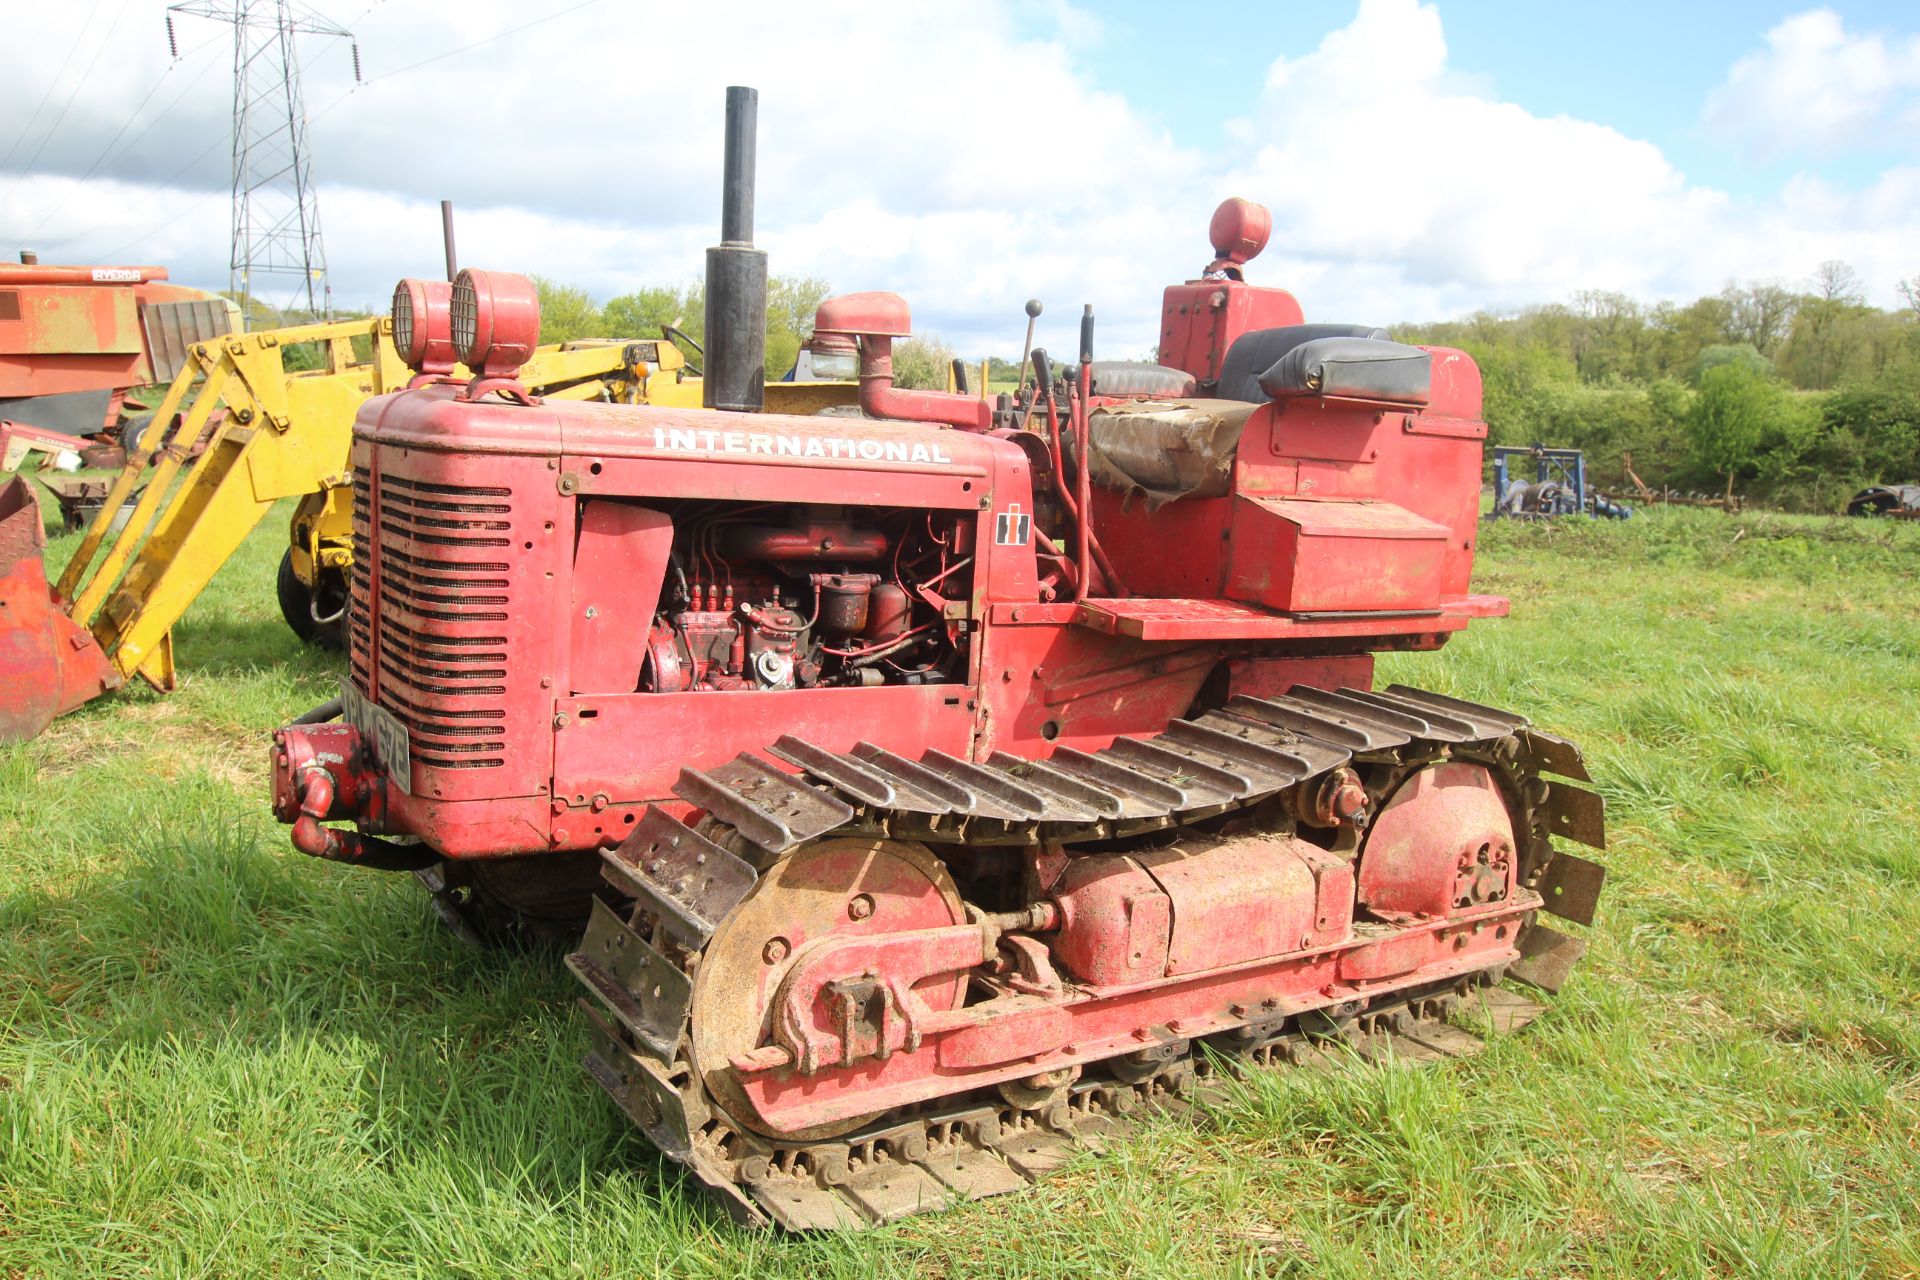 International BTD6 steel track crawler. Registration TPU 467E (expired). Serial Number 9856. With